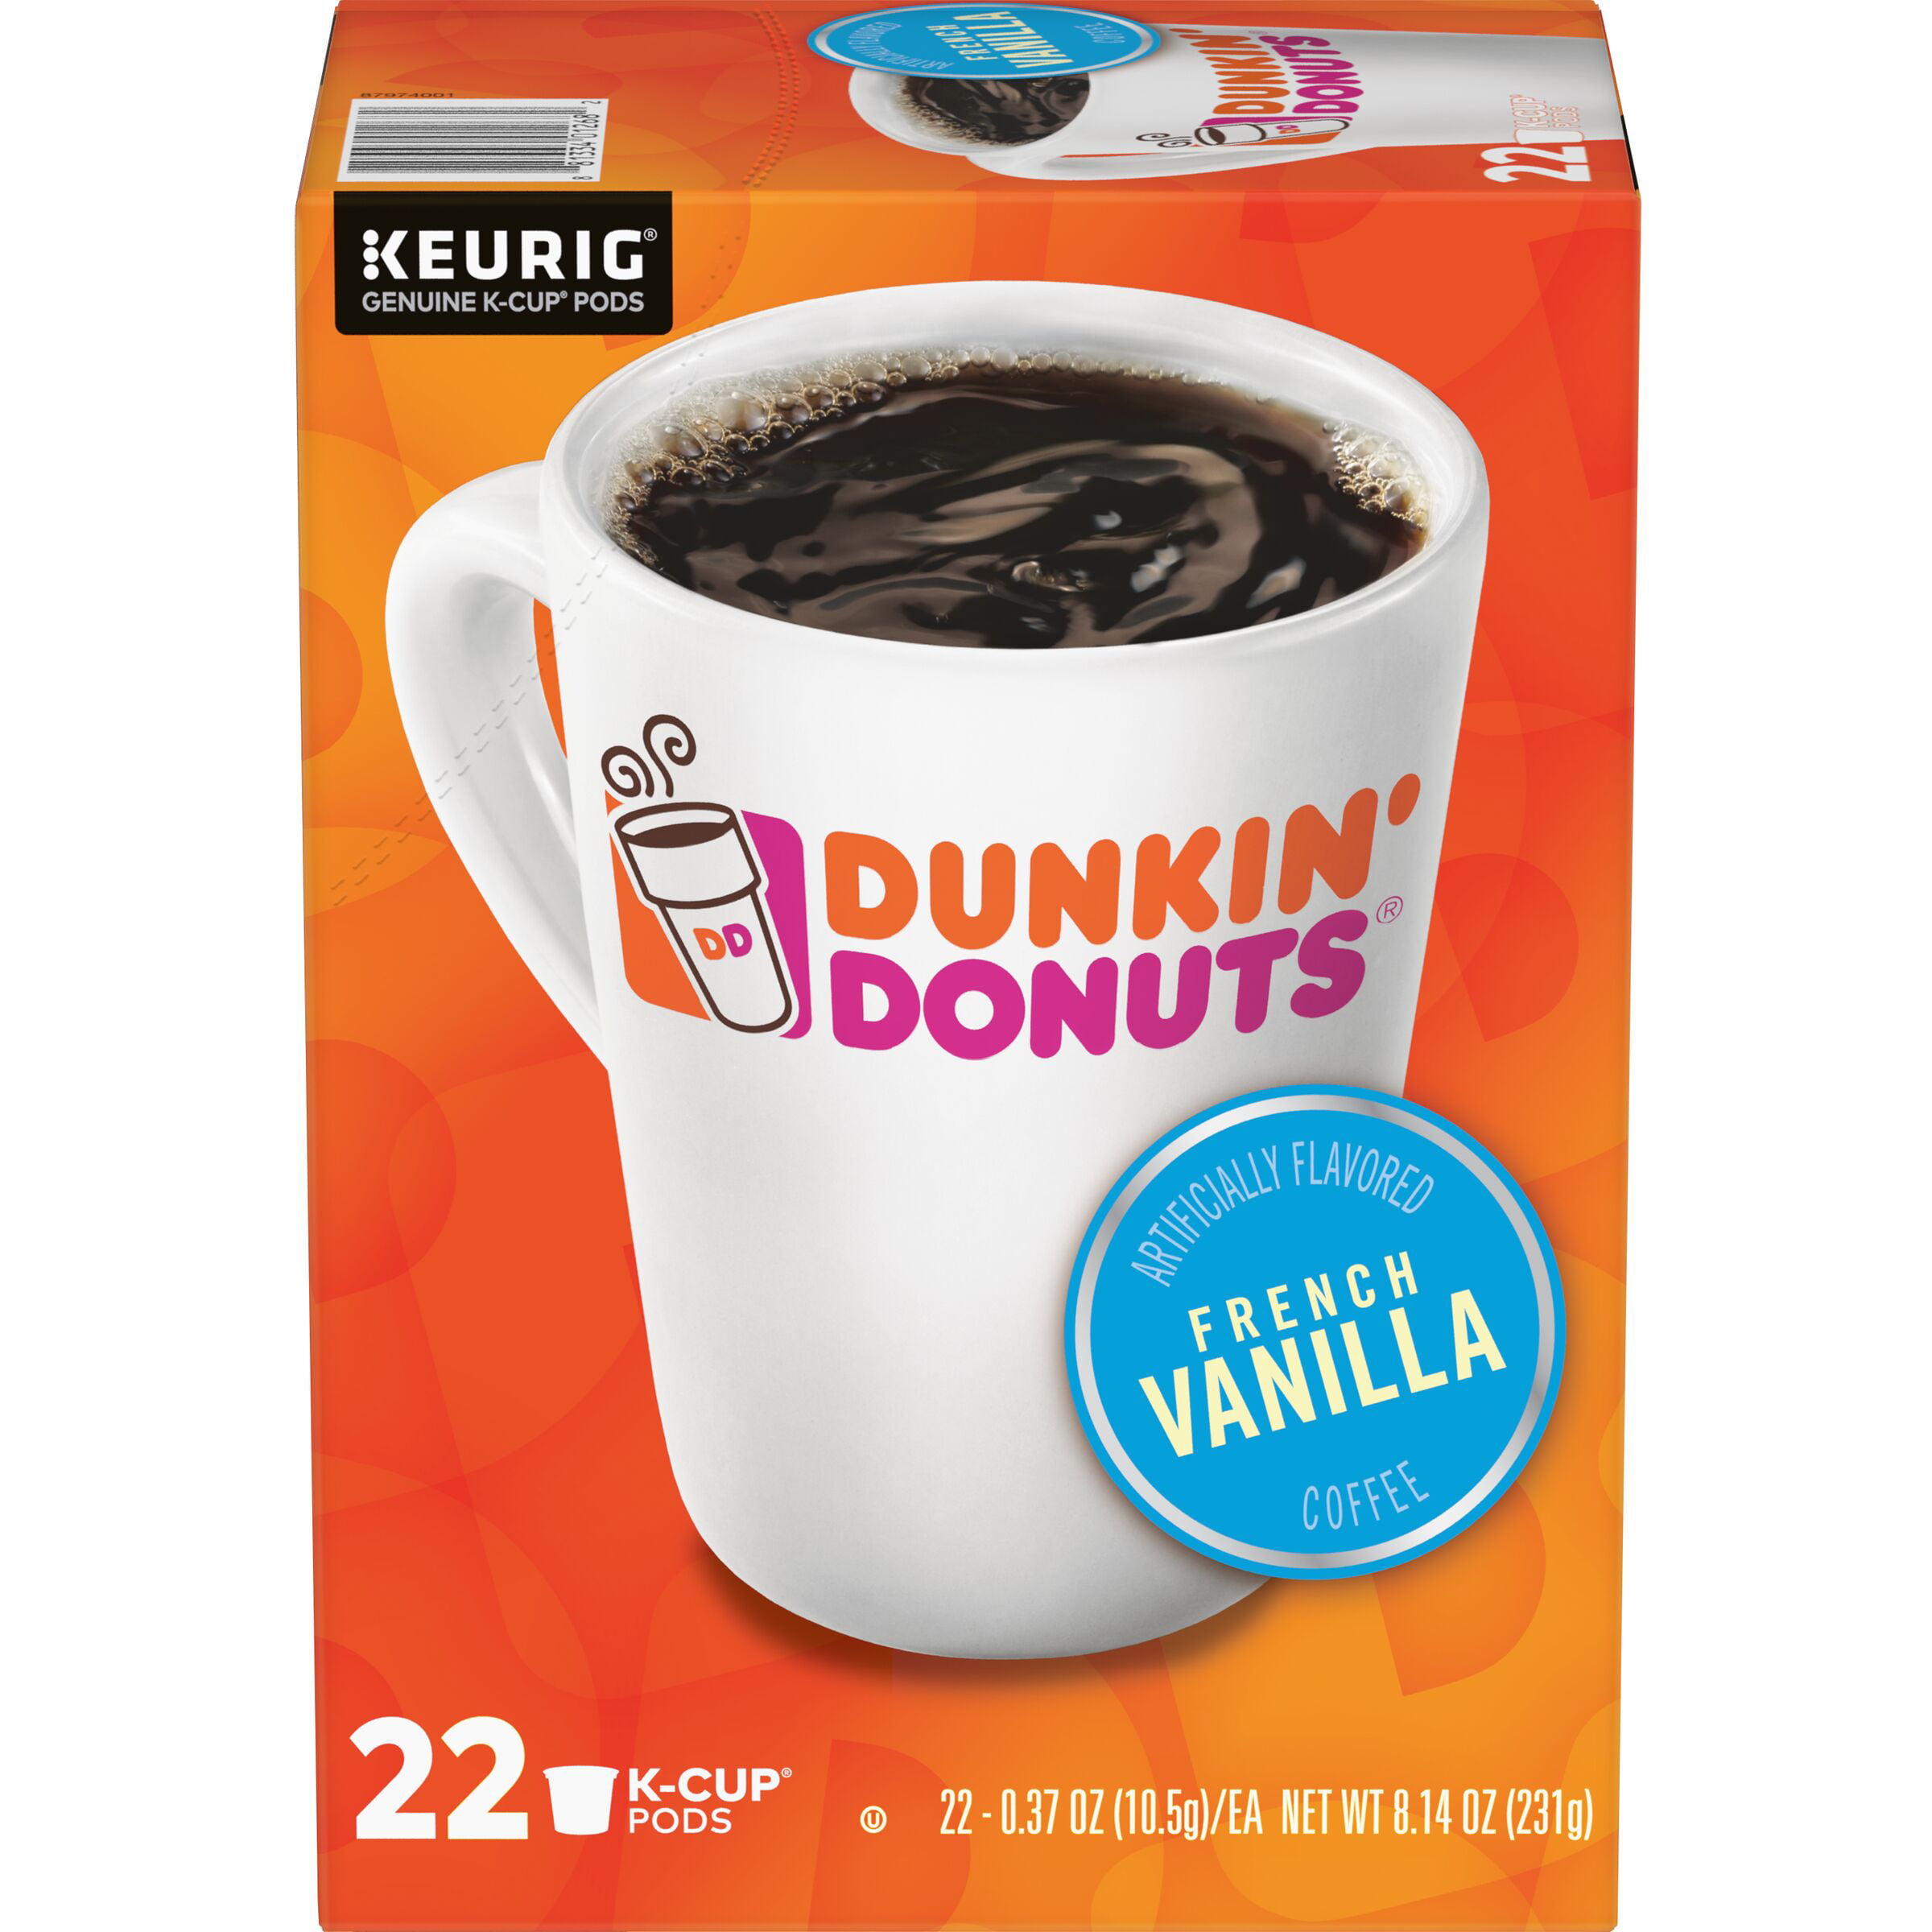 Dunkin French Vanilla Artificially Flavored Coffee, 22 K-Cup Pods